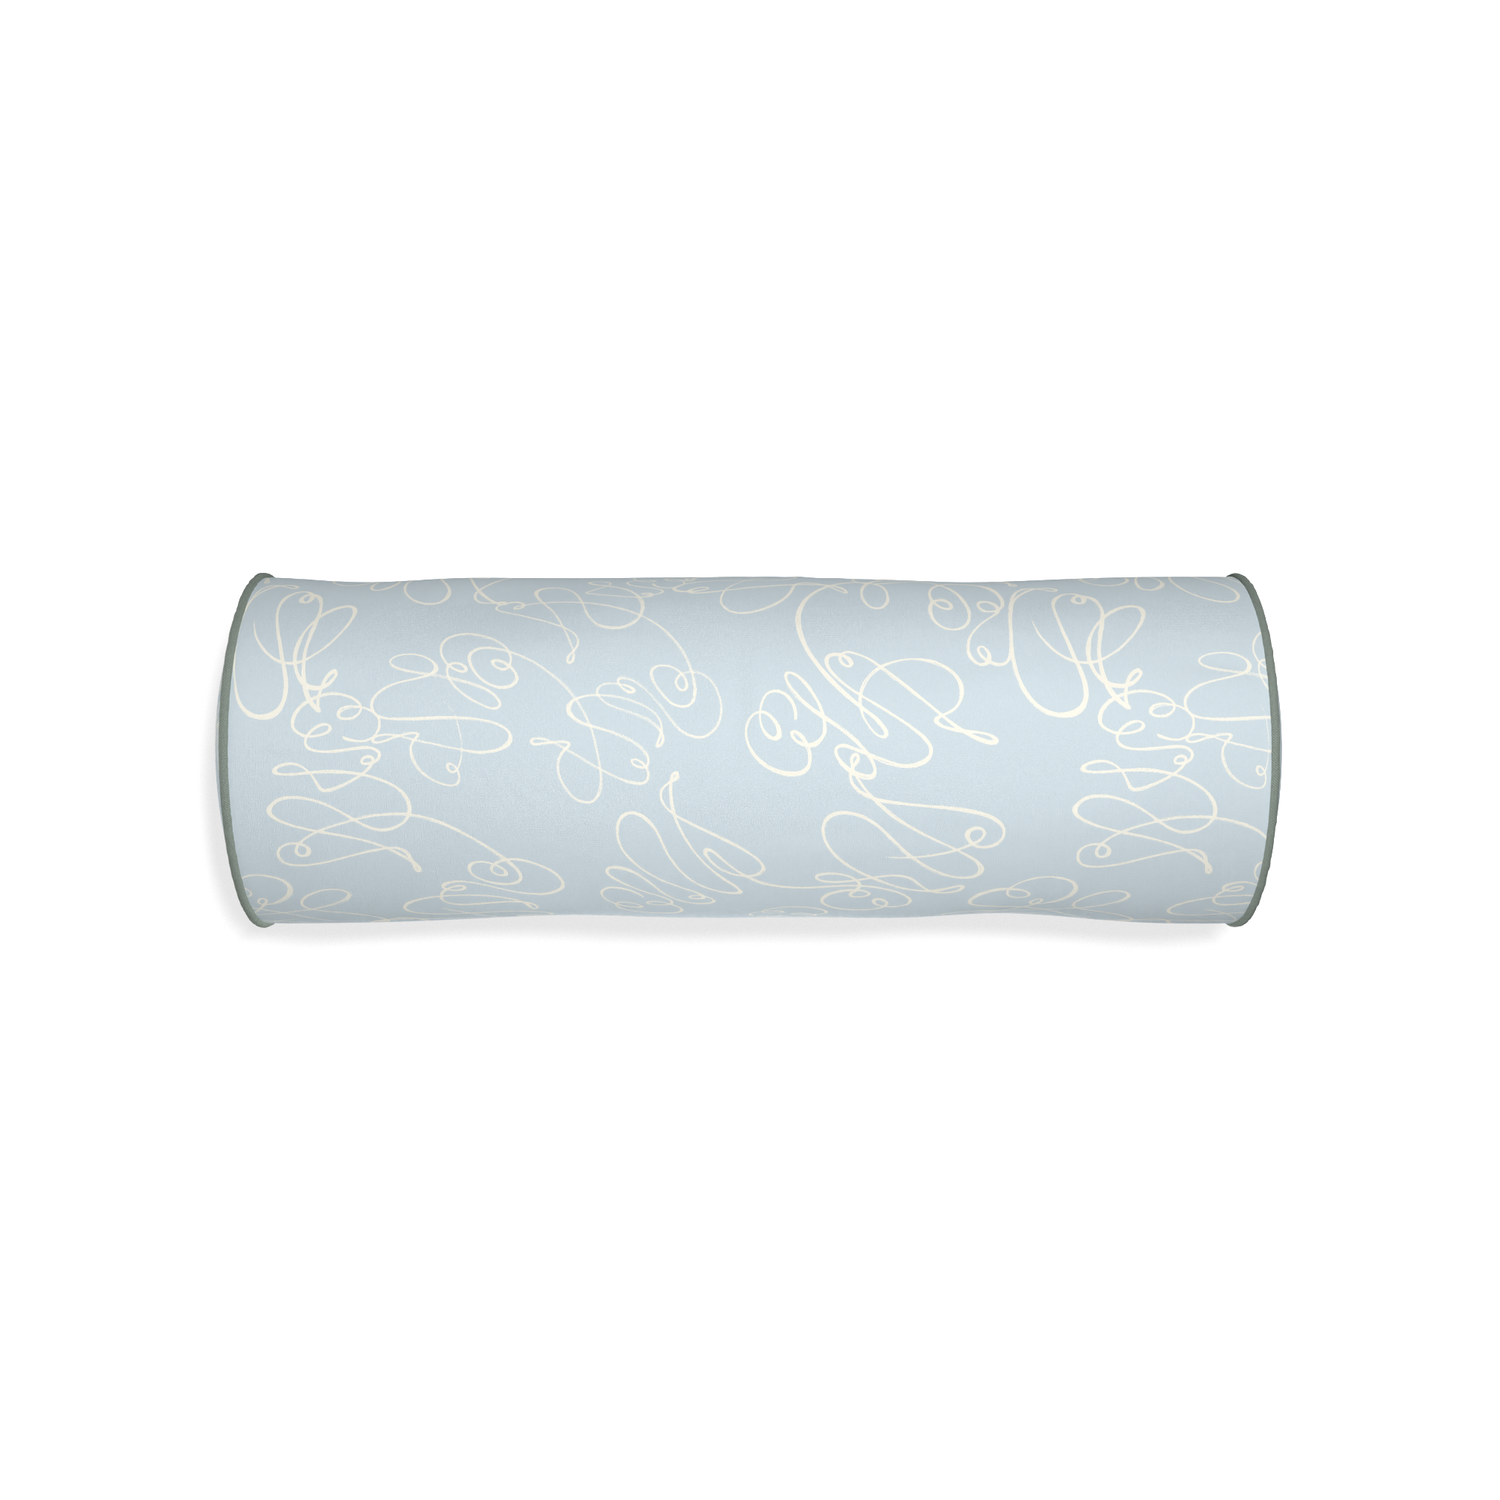 Bolster mirabella custom powder blue abstractpillow with sage piping on white background